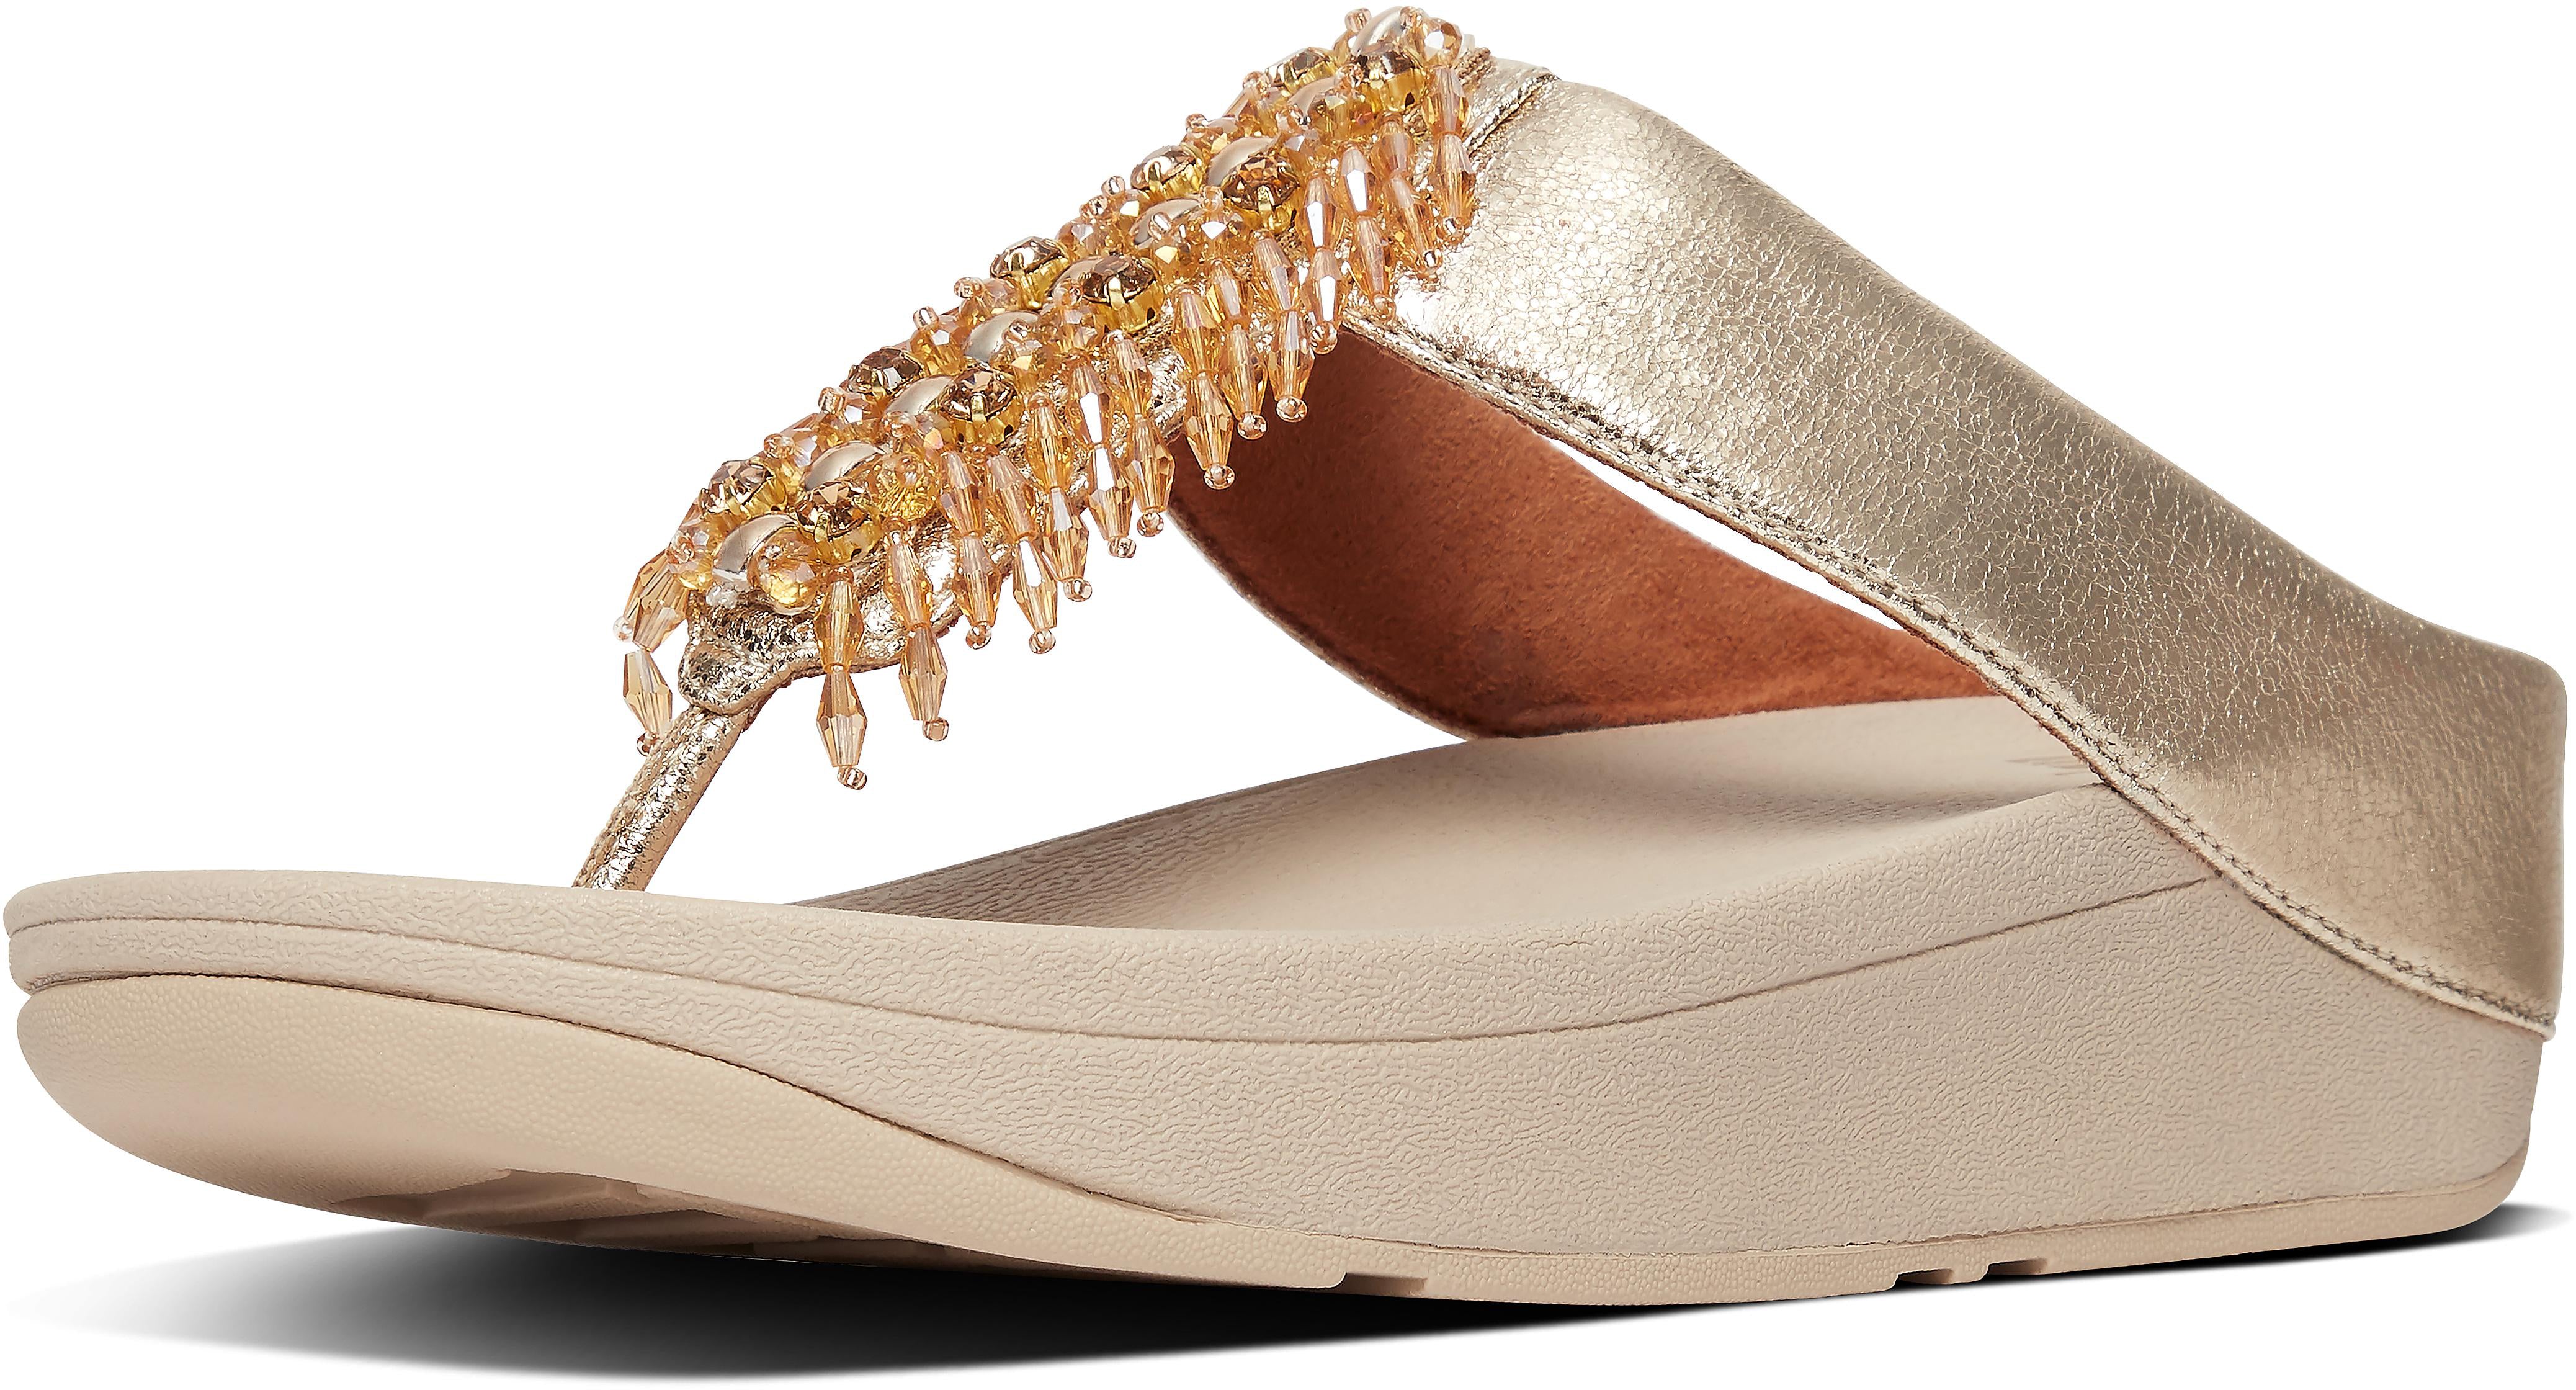 Velma Adorn Toe-Thongs in Artisan Gold from the side